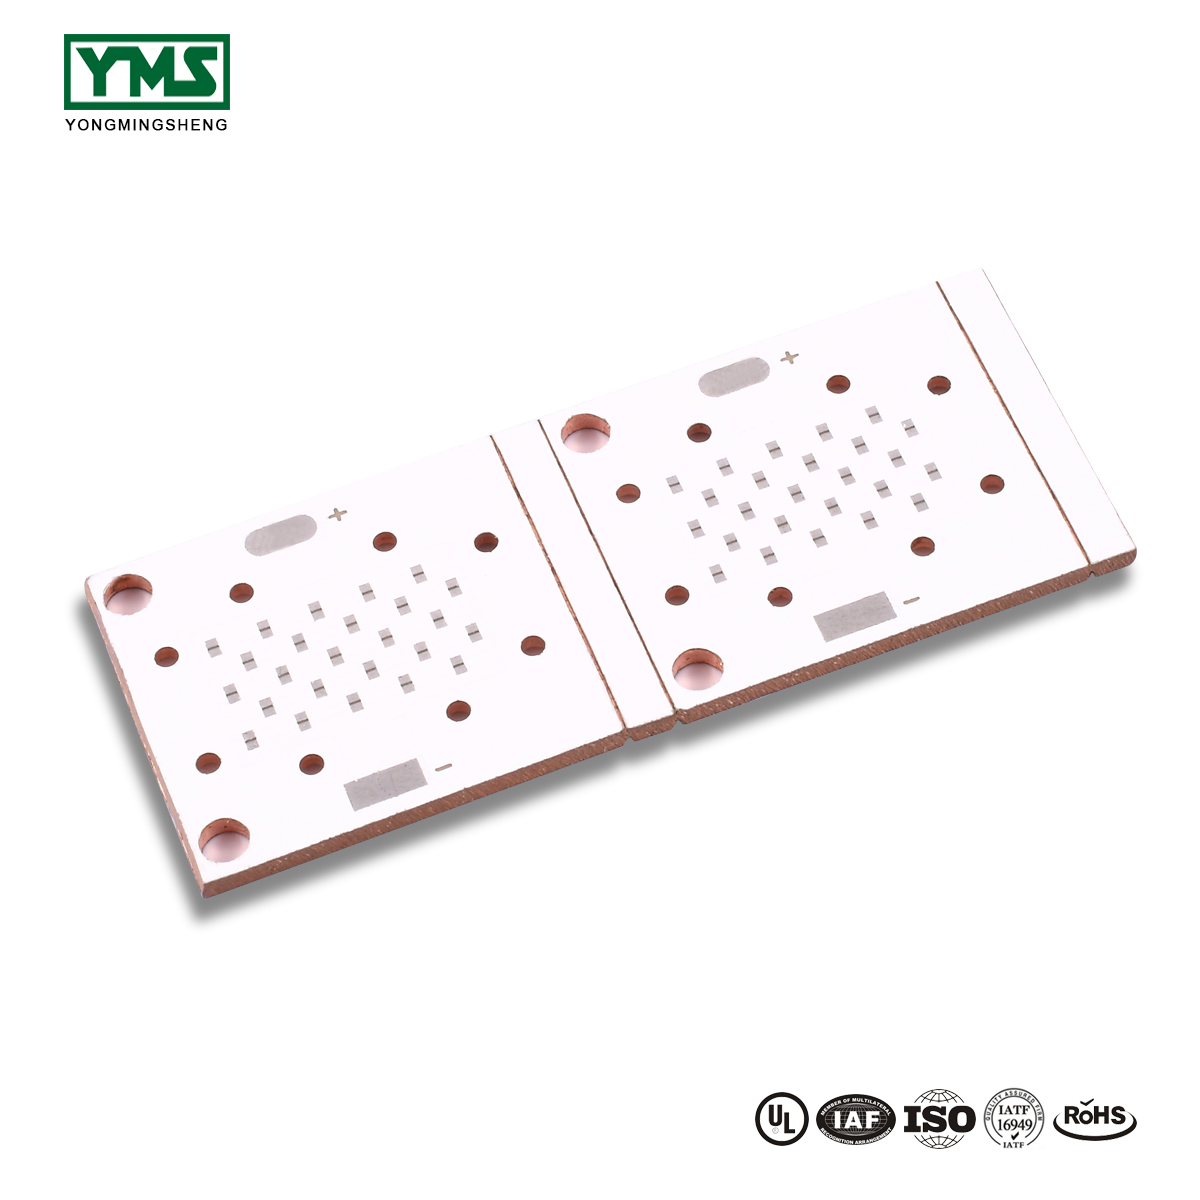 Factory wholesale 2layer Flexible Circuit Board - 1 Layer Thermoelectric Copper base Board | YMSPCB – Yongmingsheng